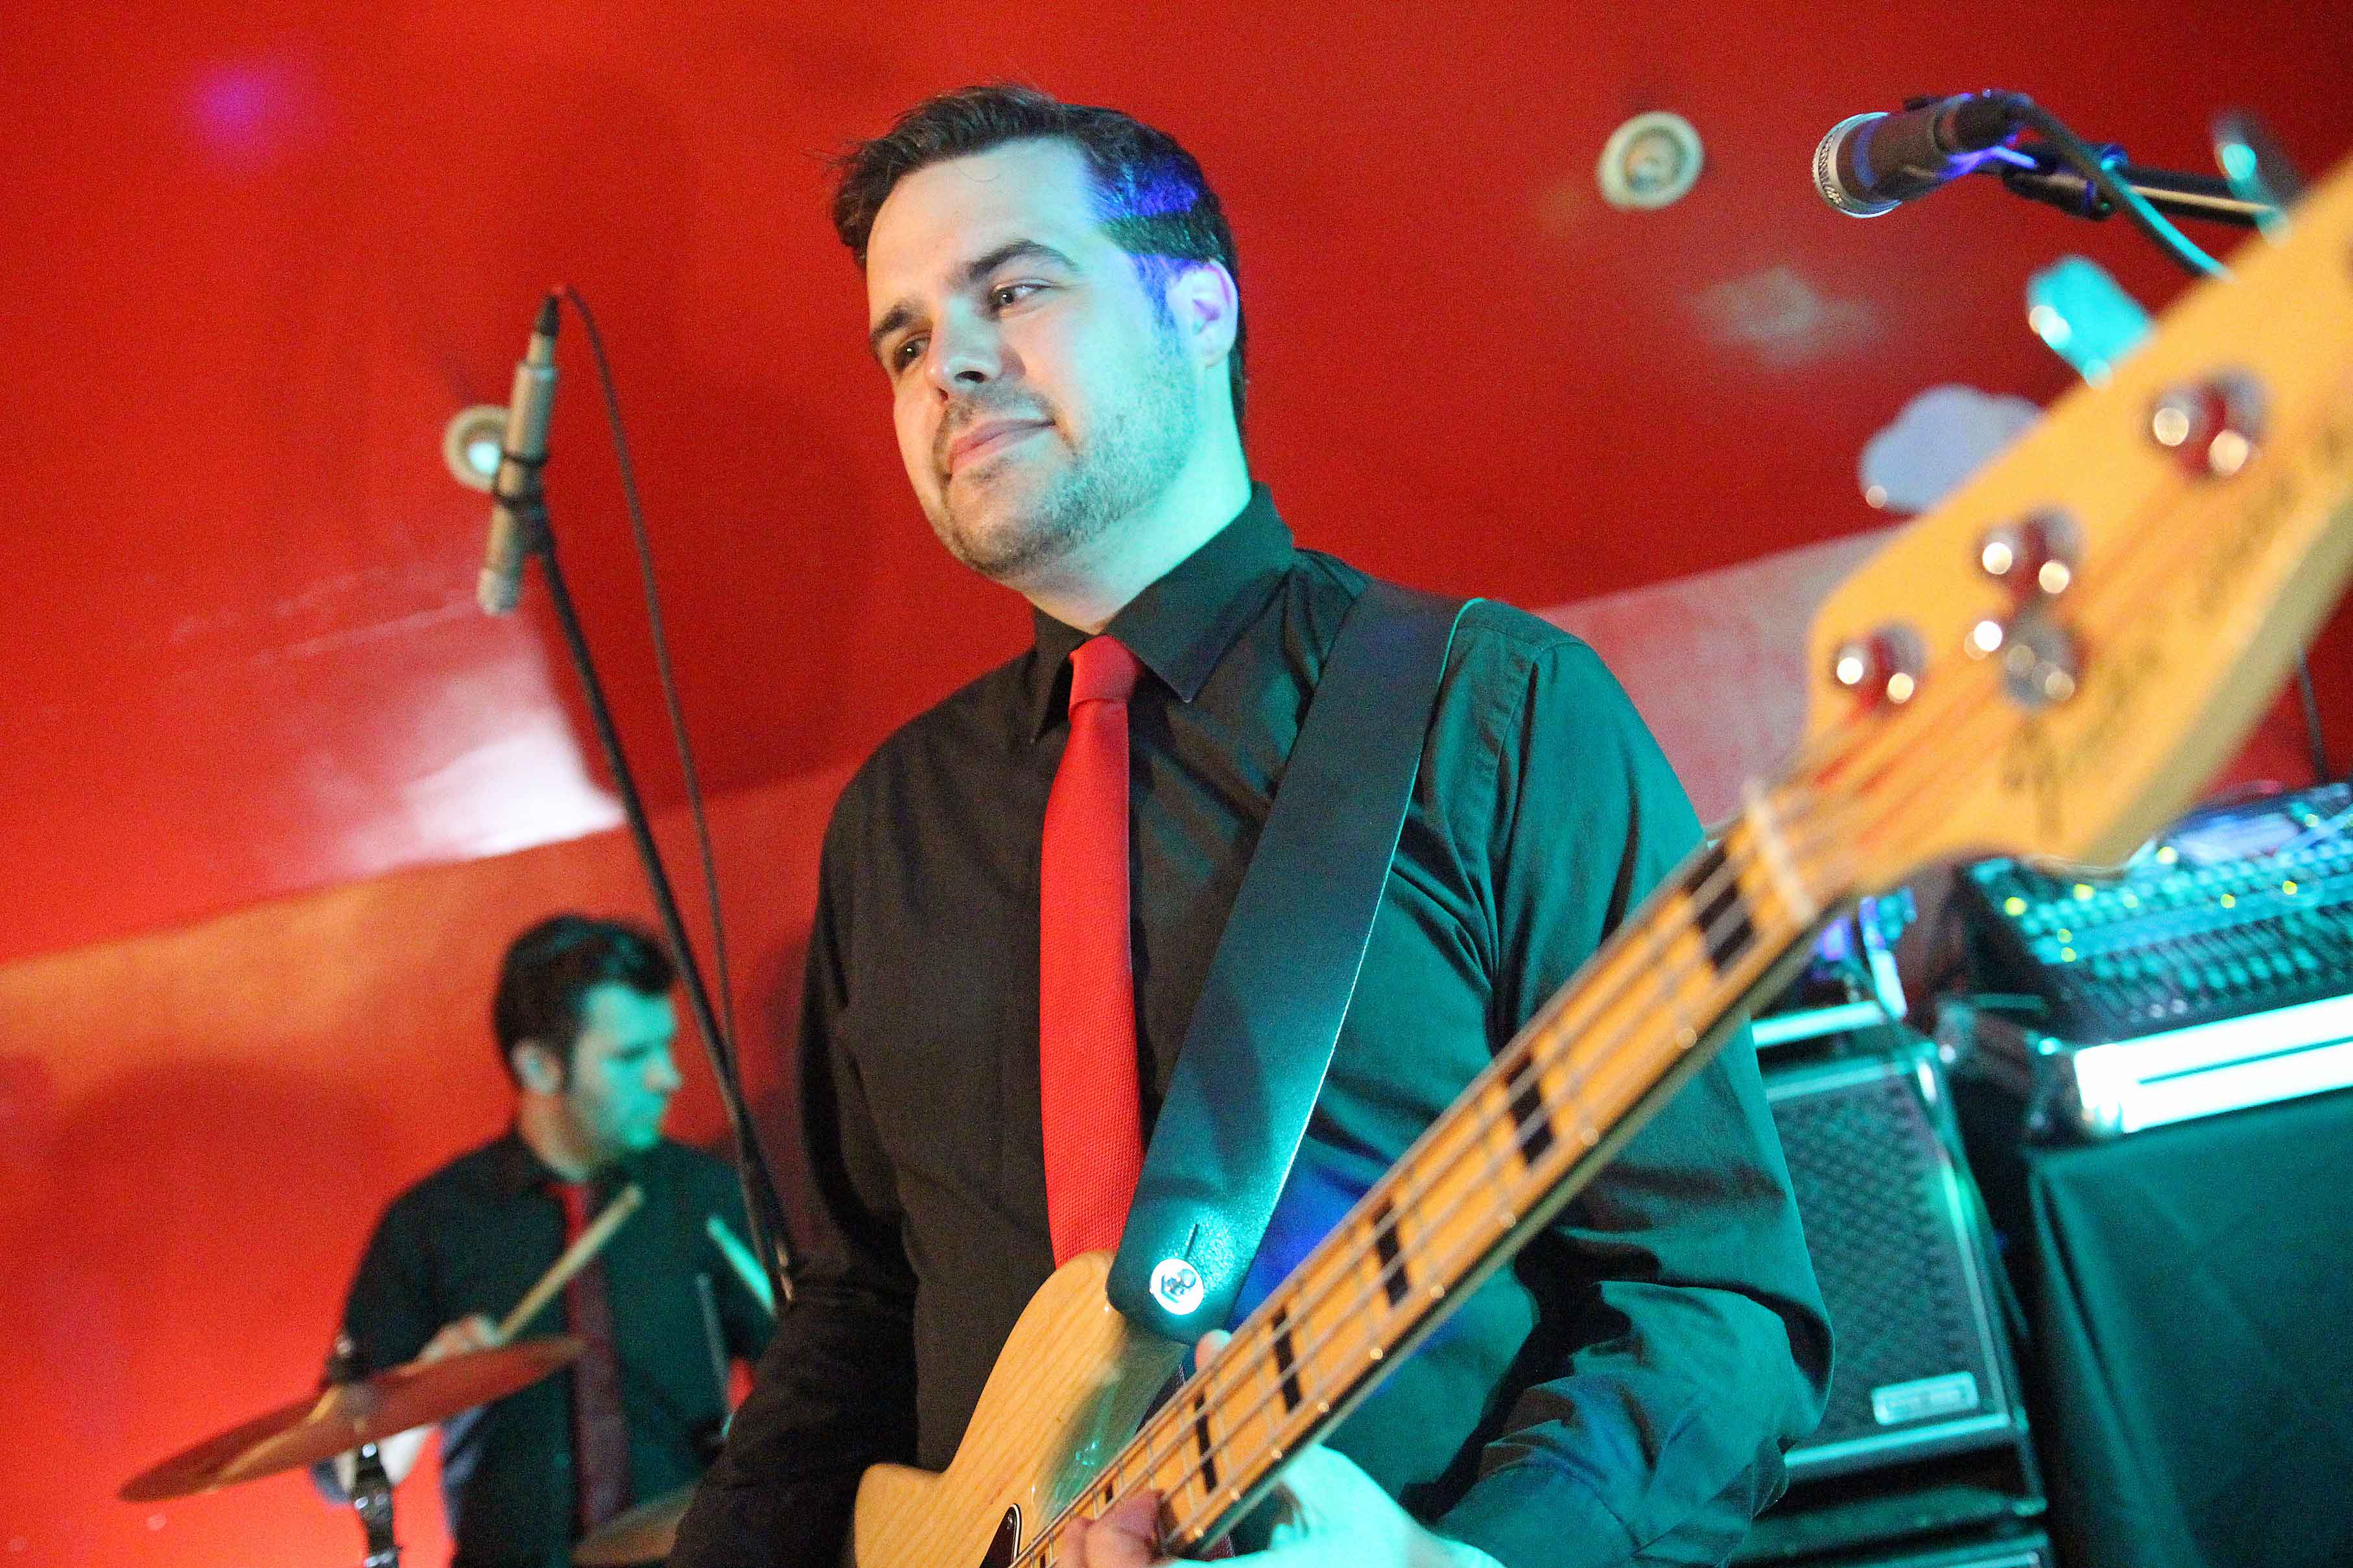 Adam, Bass, Bassist, Discovered, Functions, Weddings, Party, Covers, Band